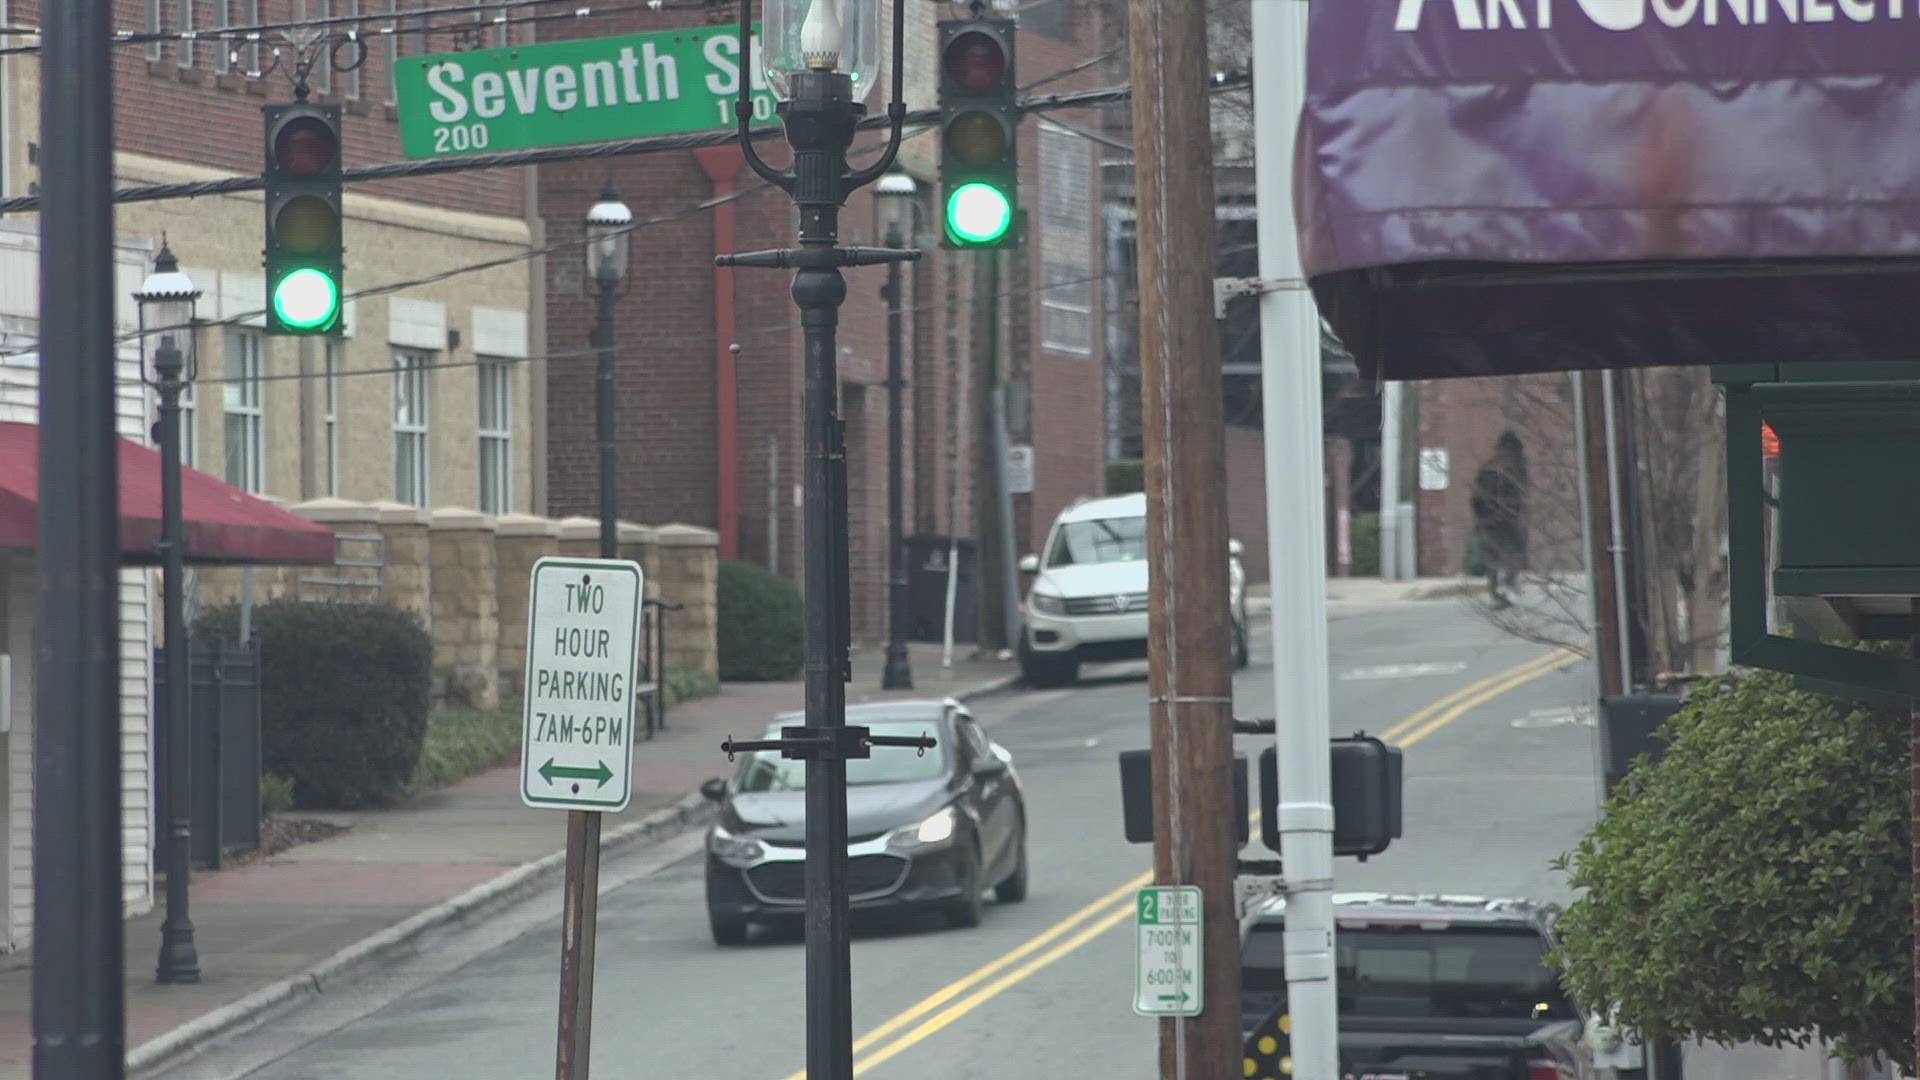 Police said calls to downtown have increased dramatically over the past decade as the population grew. Police want to add a new downtown district because of it.